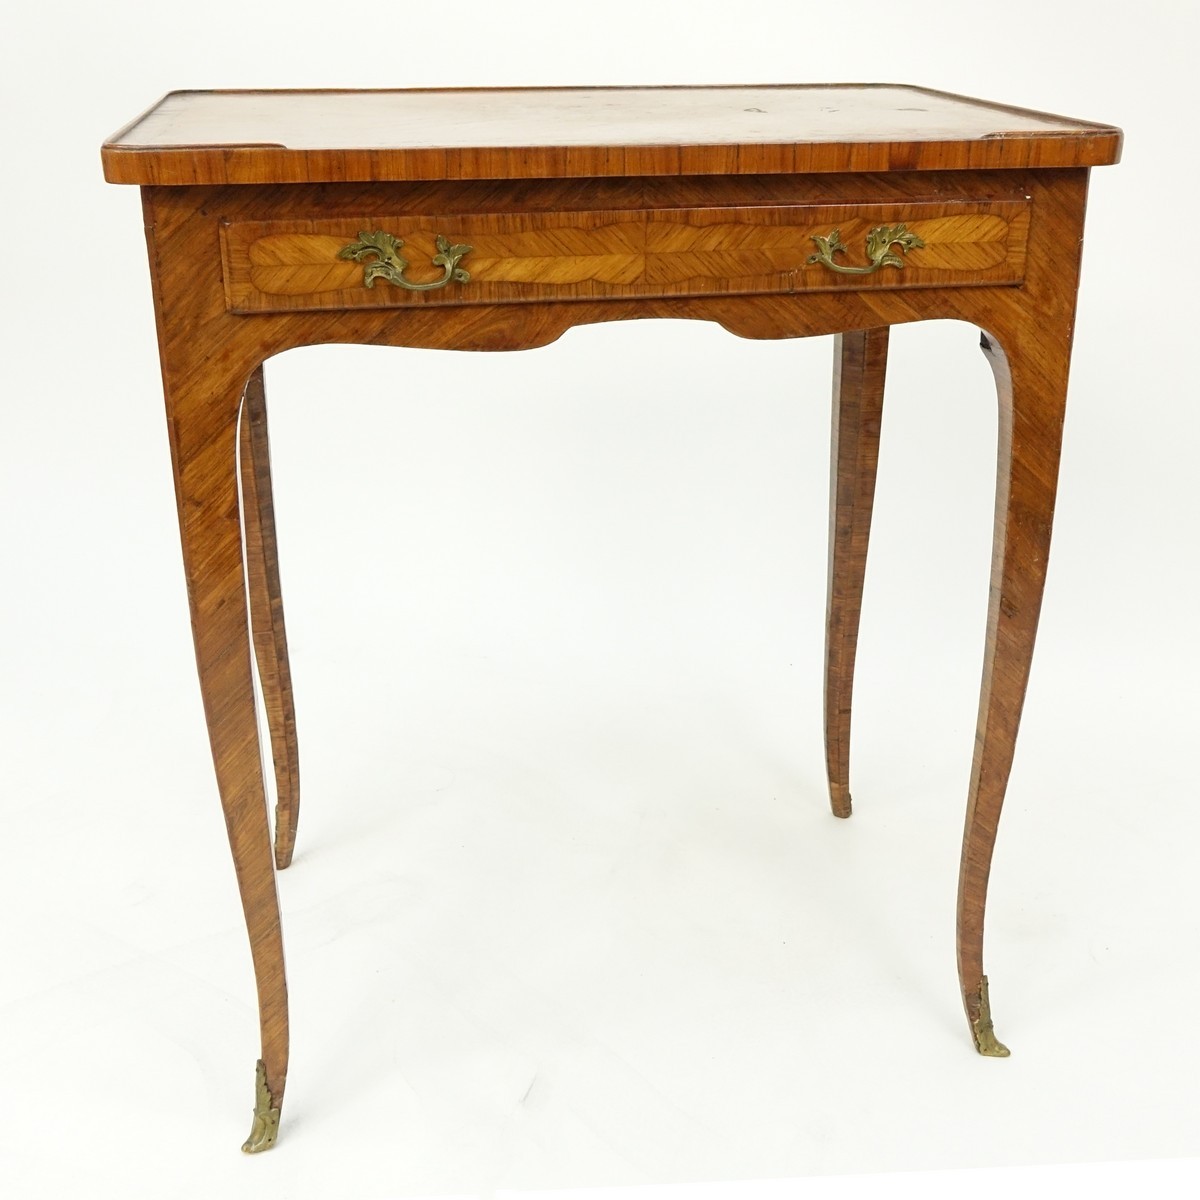 19th Century French Kingwood Inlaid Side Table with Gilt Bronze Mounts. Large sliding drawer and st